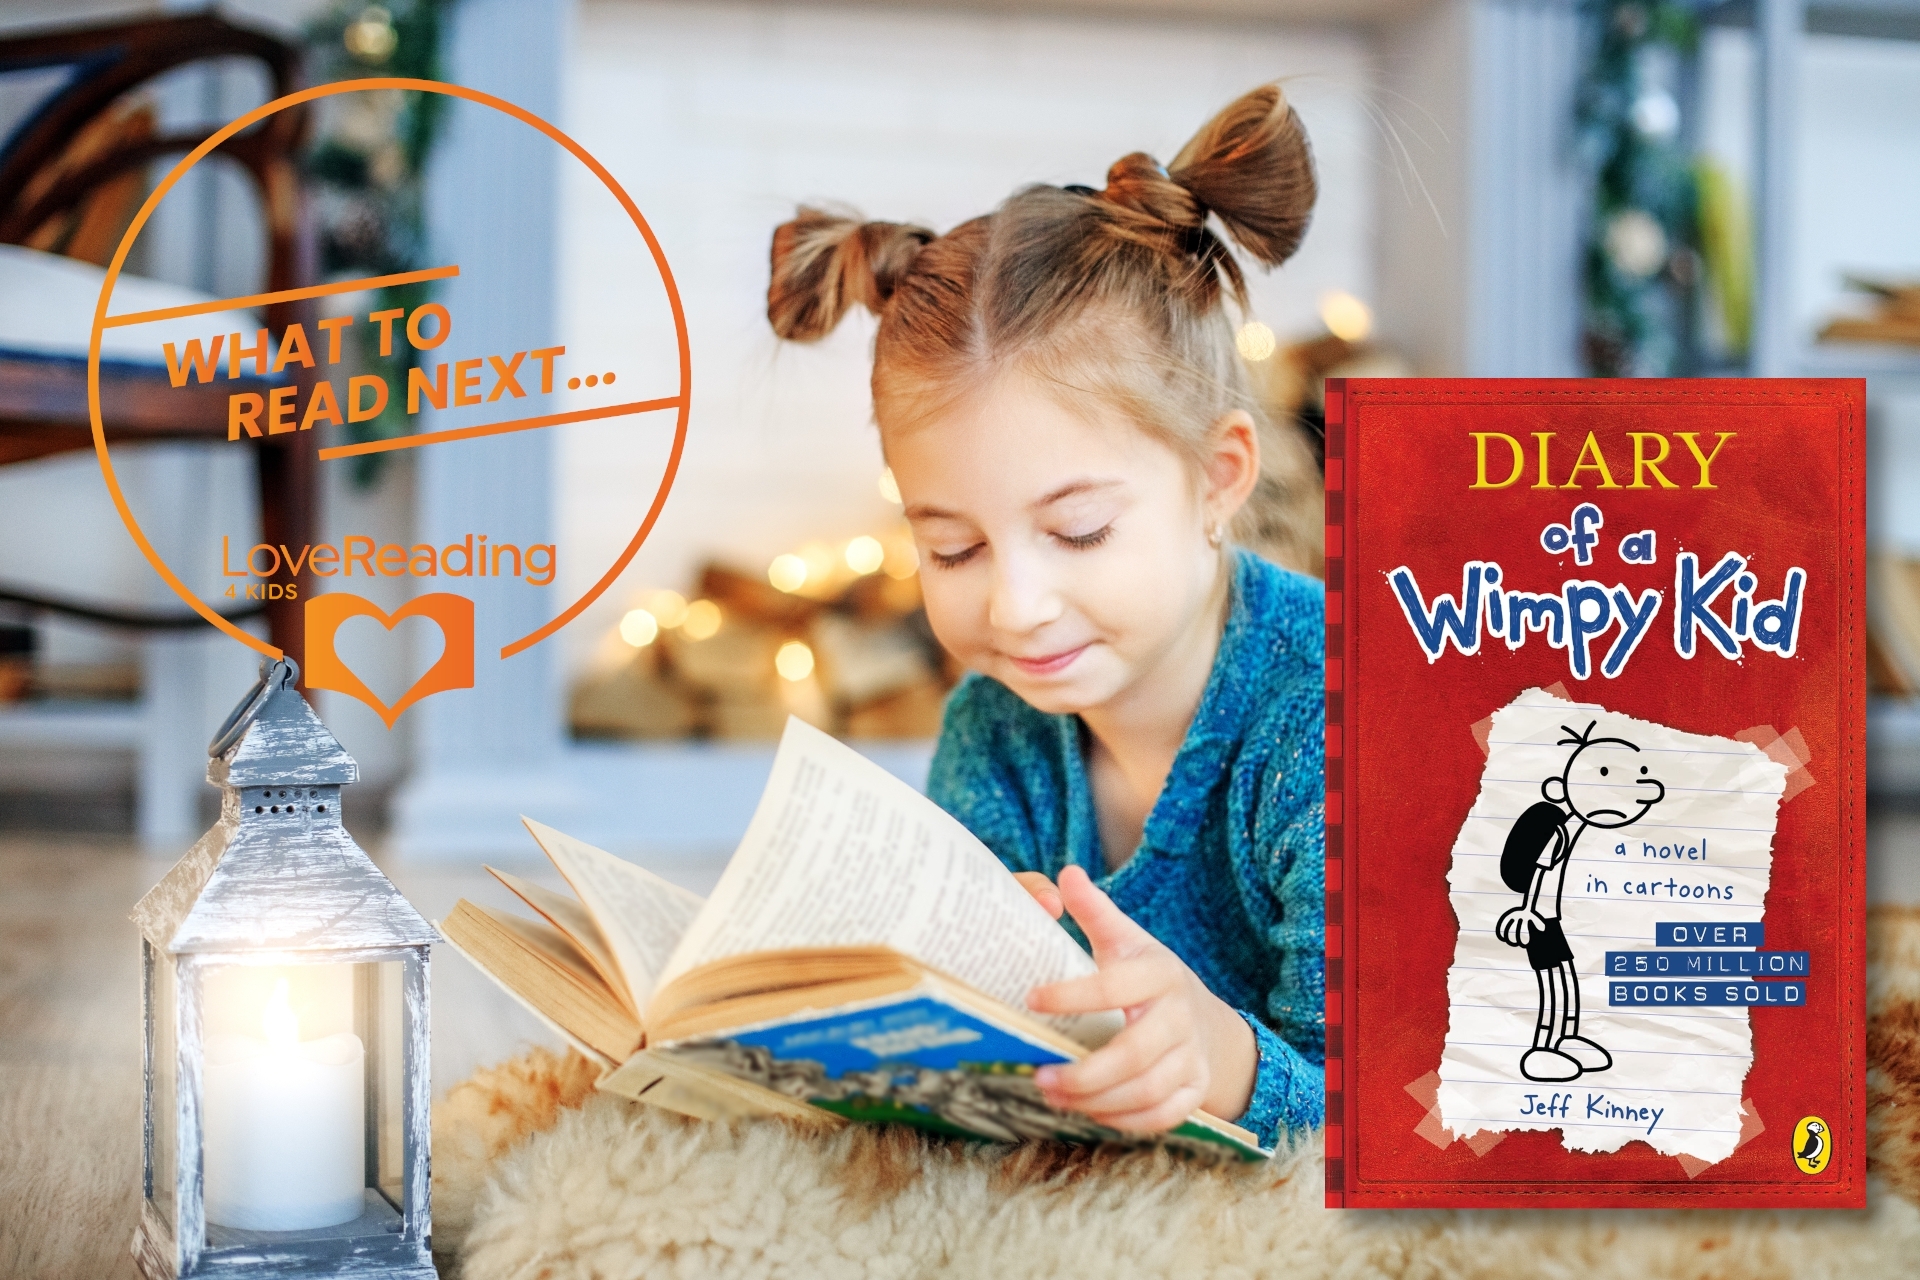 The Diary of a Wimpy Kid, What To Read Next?